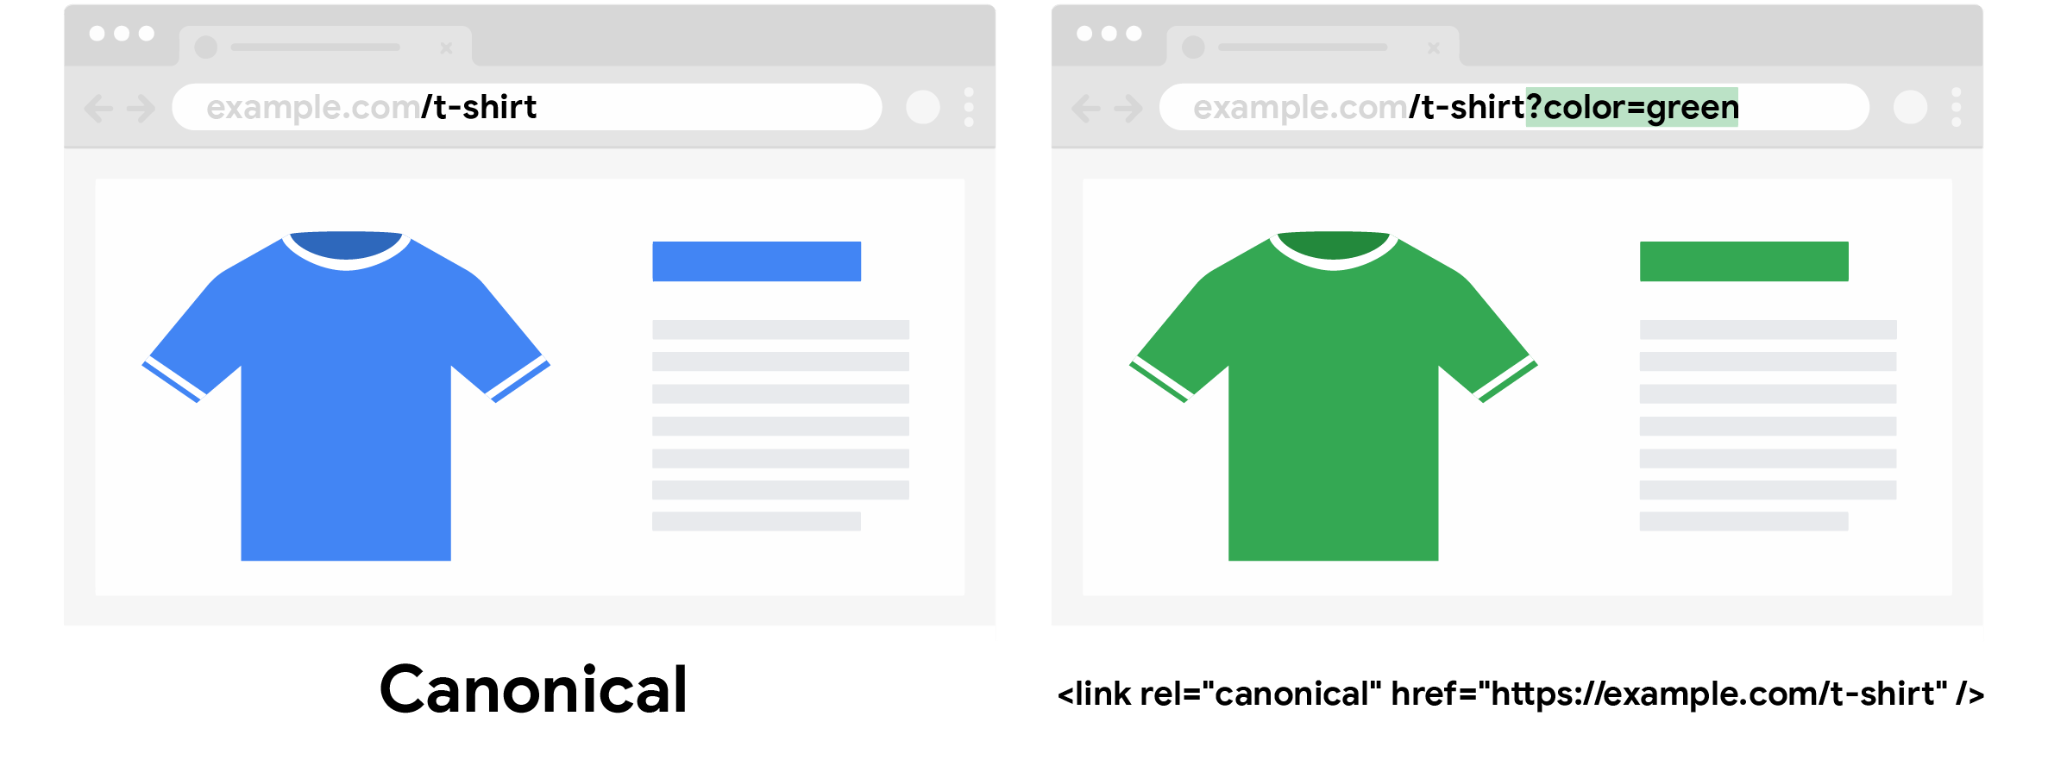 A canonical blue T-shirt without color query parameter and a non-canoical green T-shirt with color query parameter specified